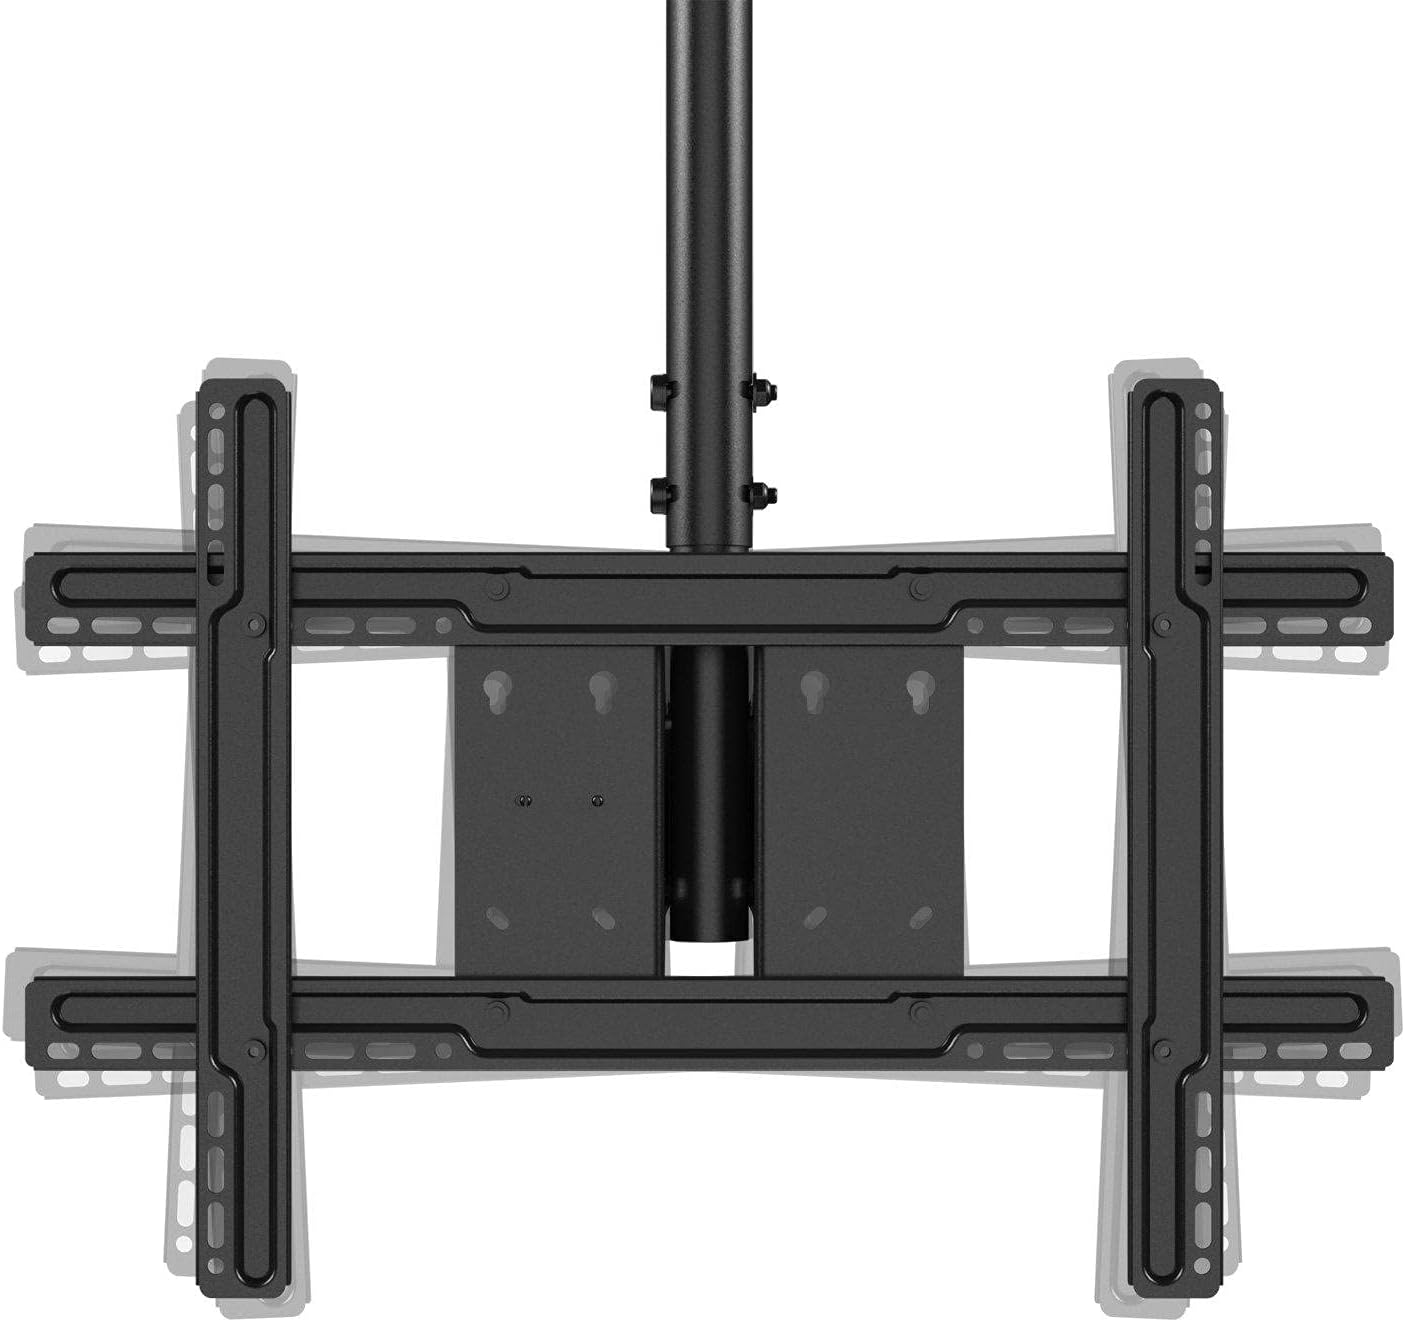 NB North Bayou Ceiling TV Mount - NBT1560-15 | Supply Master Accra, Ghana Home Accessories Buy Tools hardware Building materials